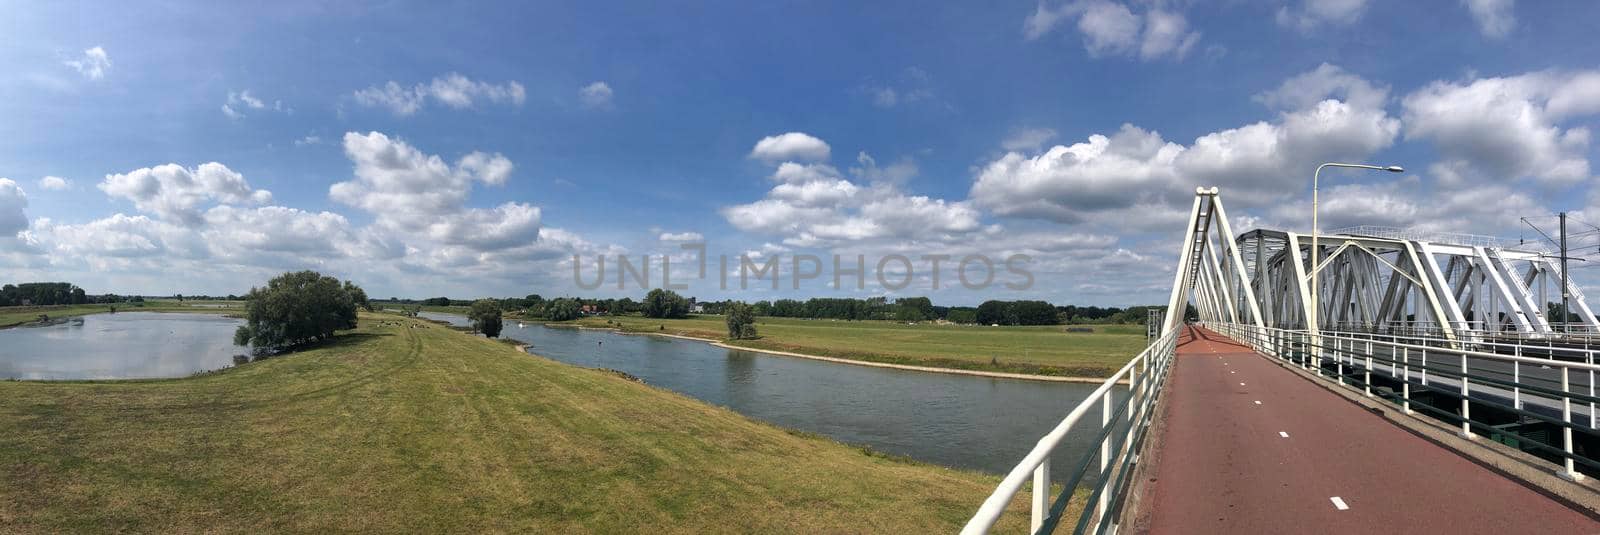 Panorama from a bridge over the IJssel  by traveltelly